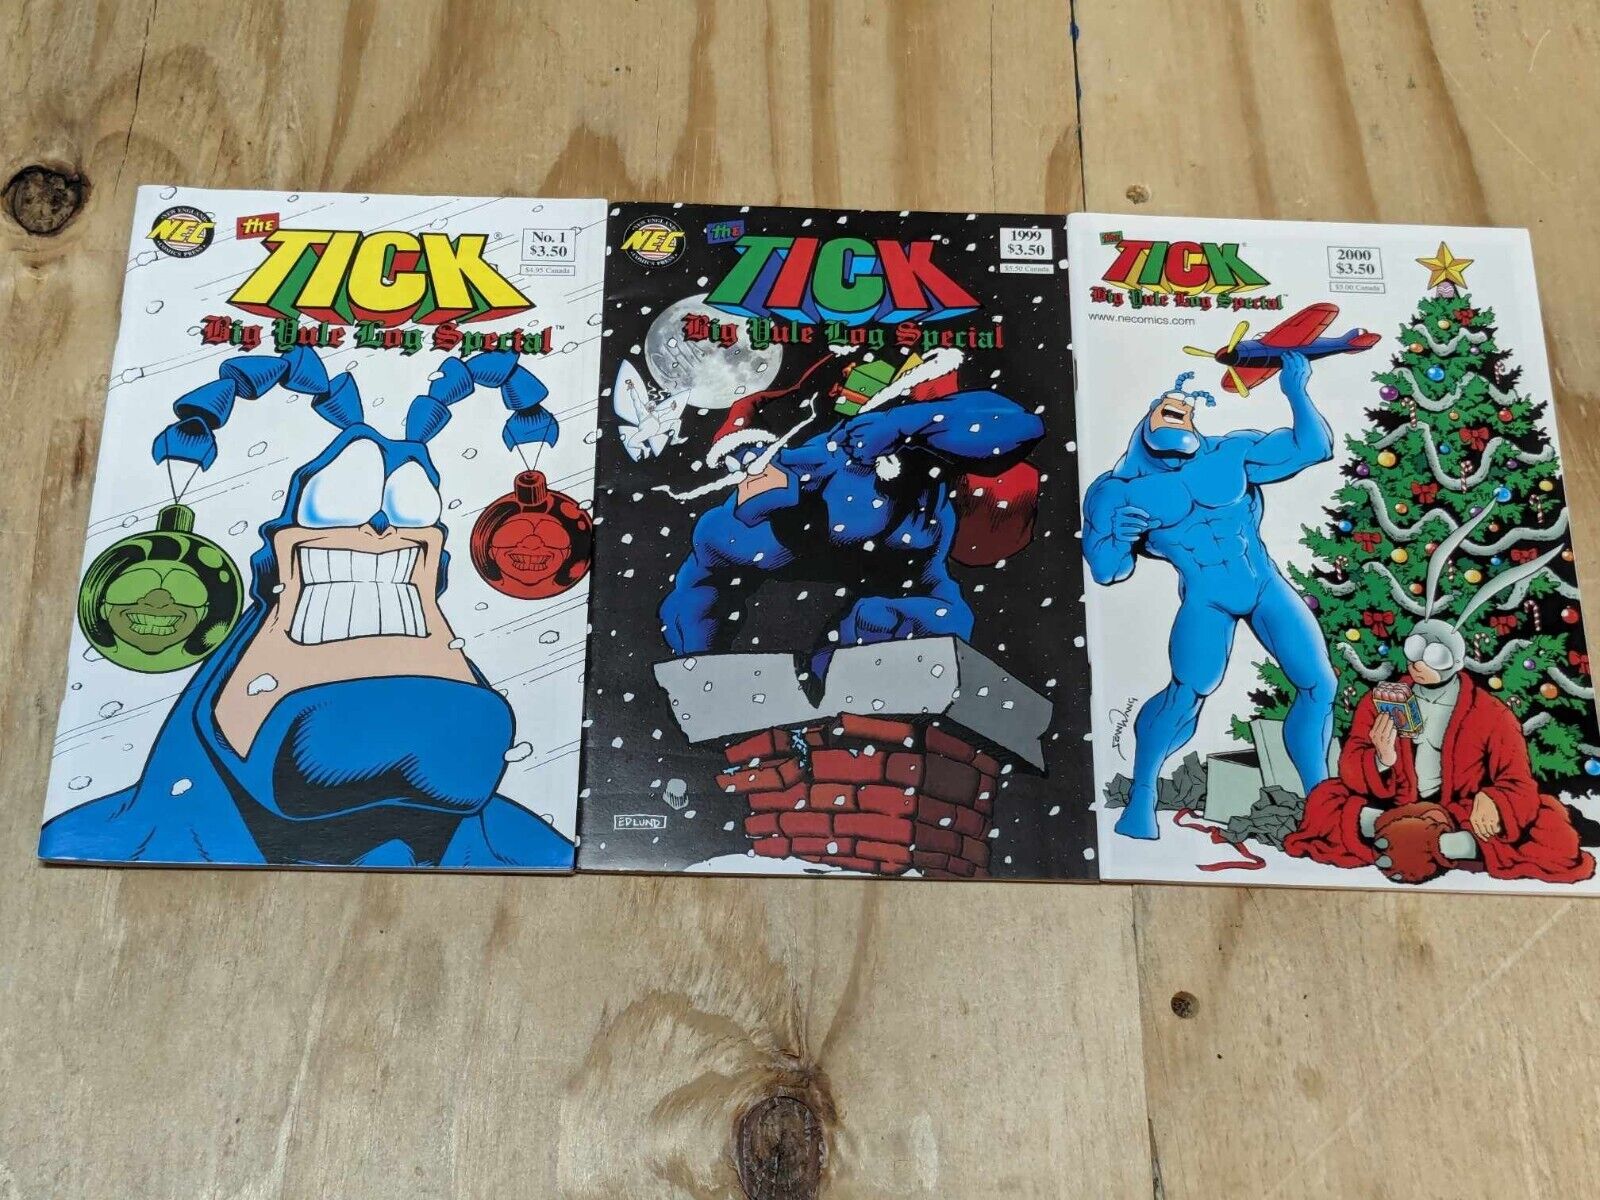 The Tick Big Yule Log Special #1, 1999, 2000 NEC